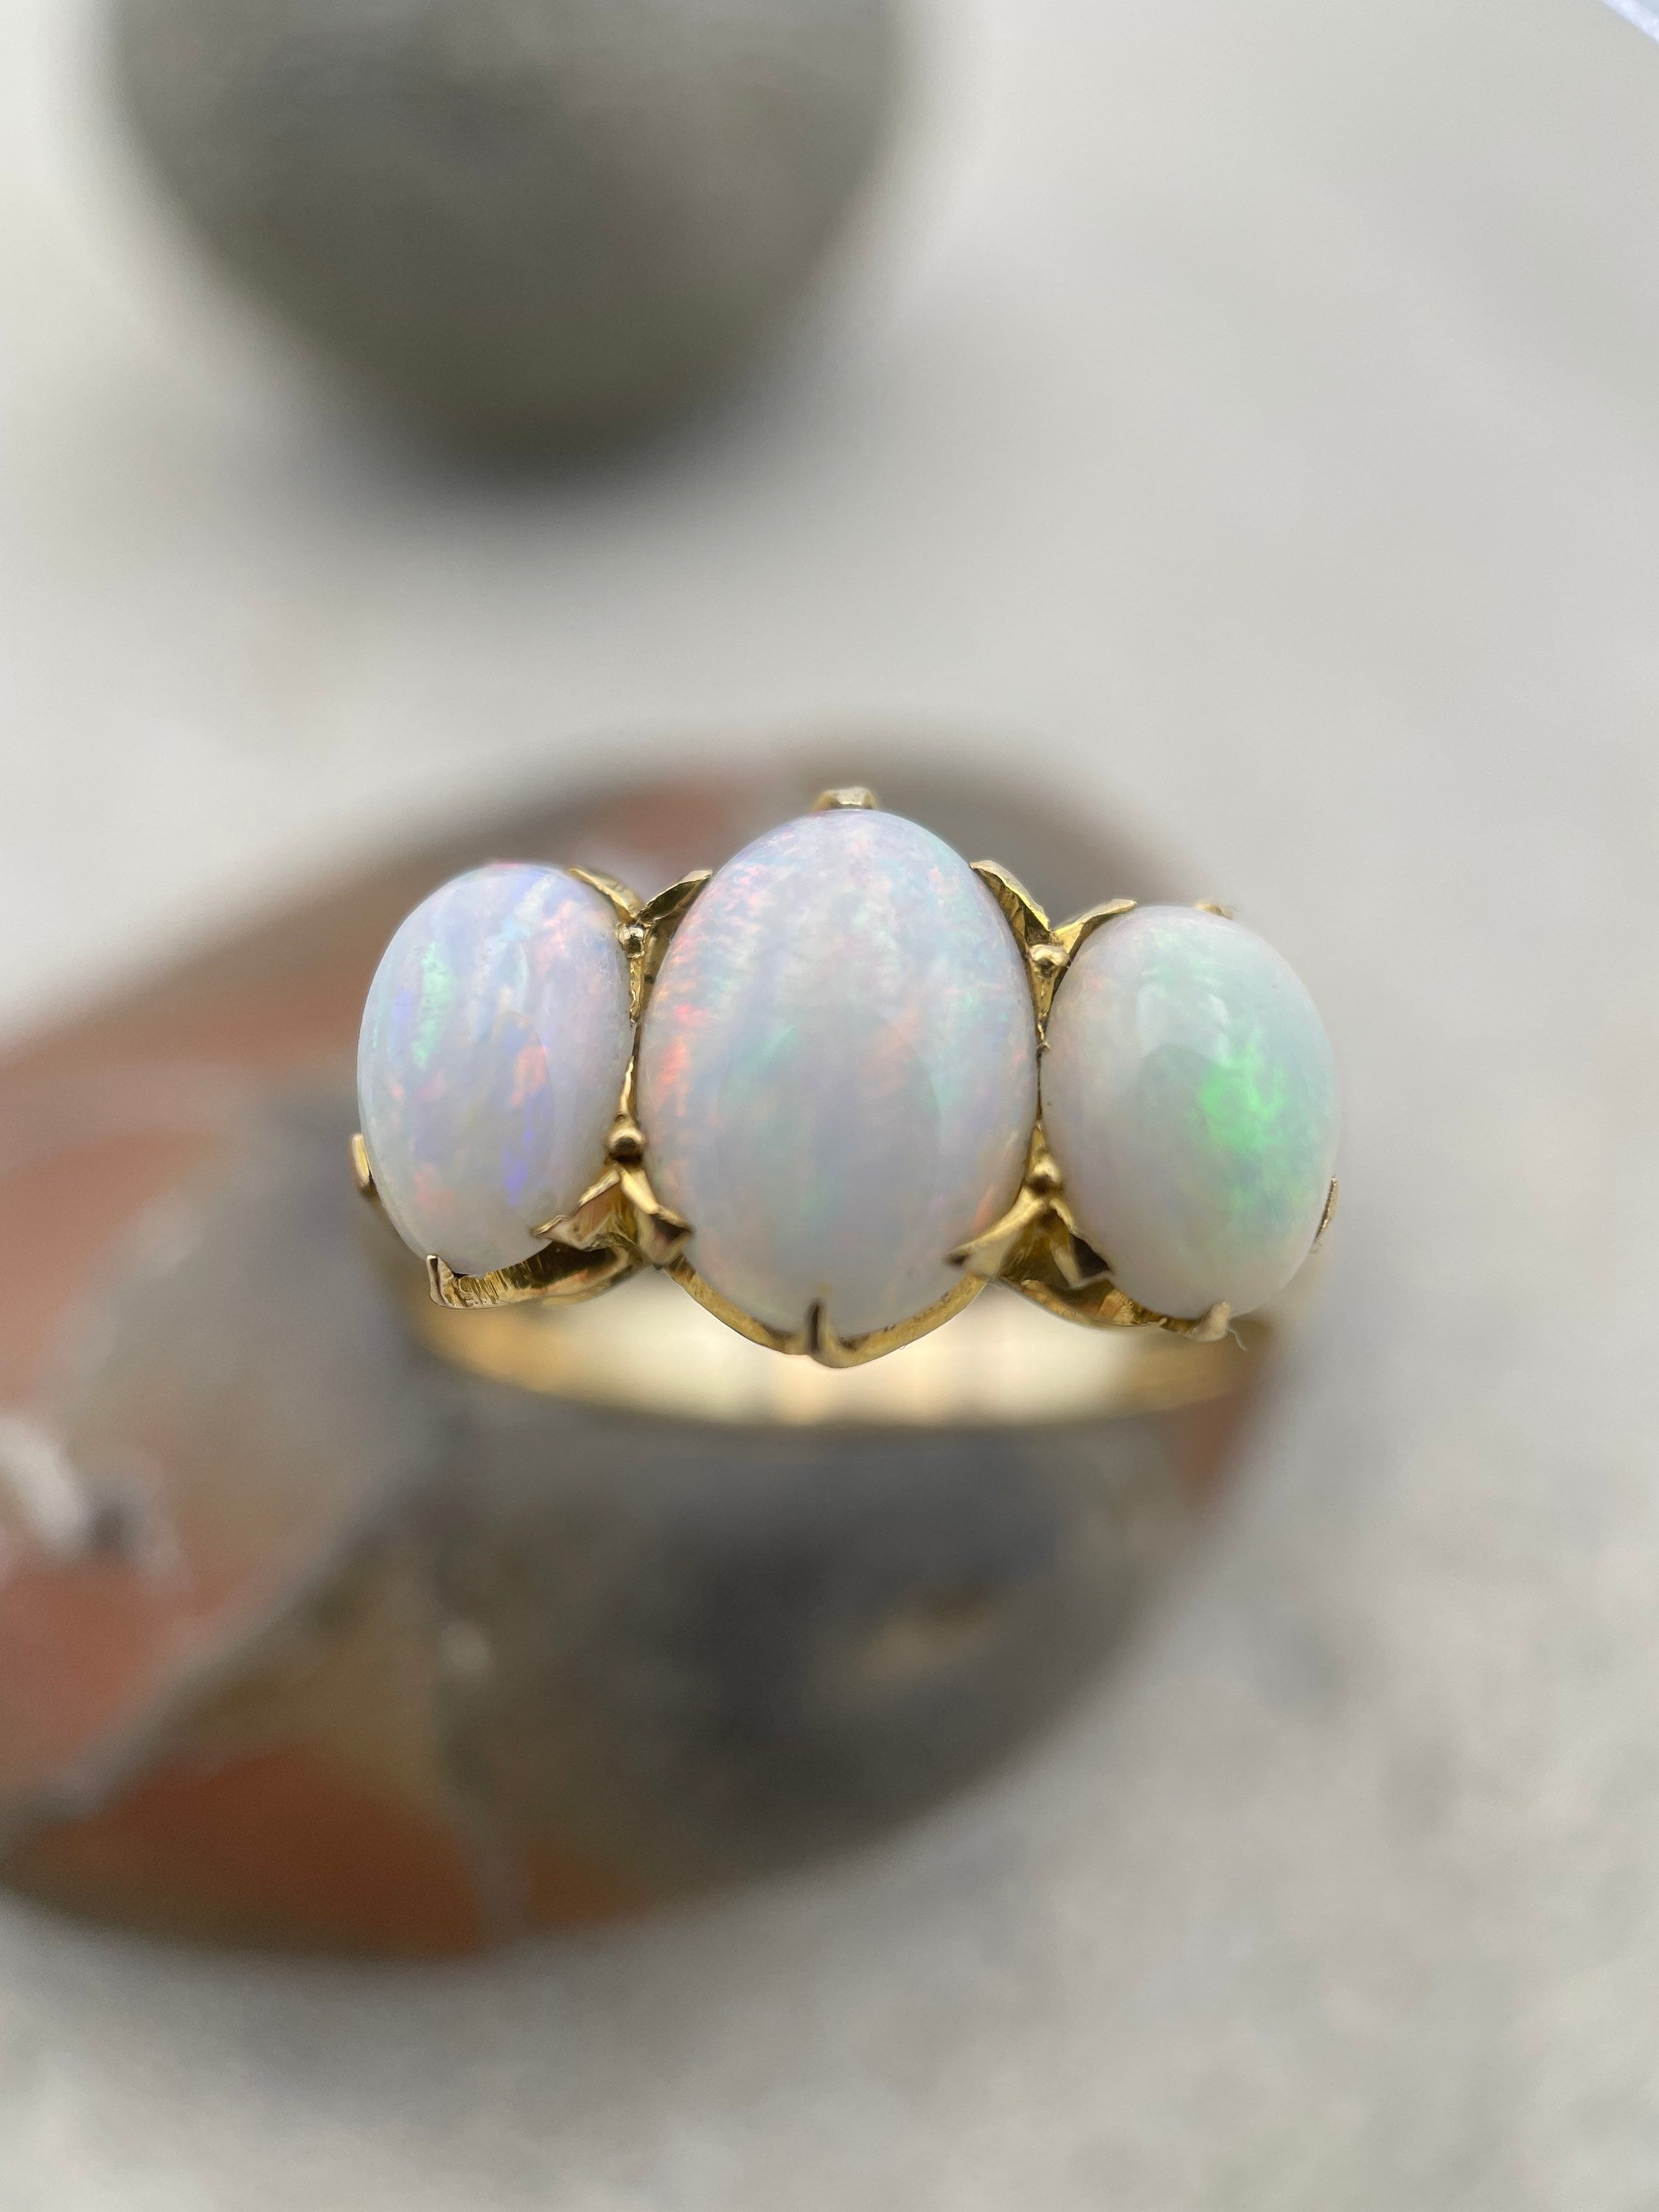 Antique 18ct Gold 3 stone Opal cabochon dress ring, English c1910s 18K gold